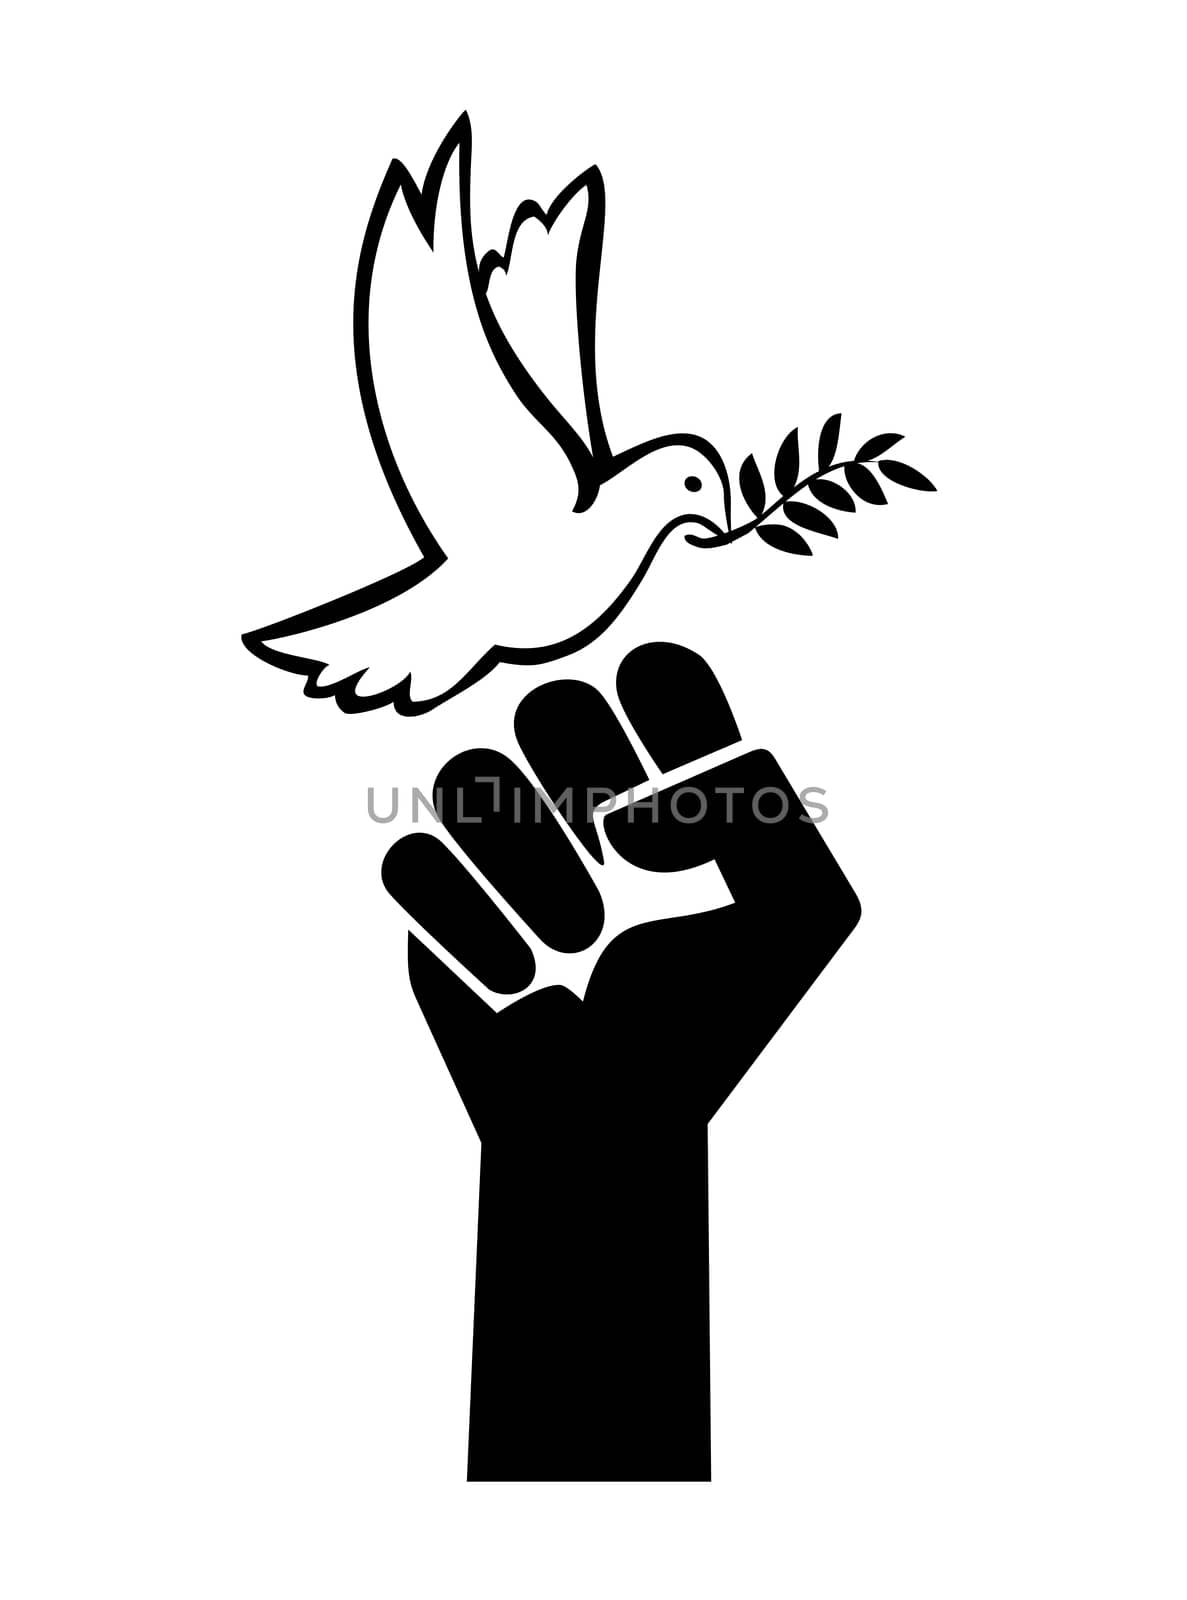 Concept sign for peace negotiations, the choice between peaceful or violent solution in business or family